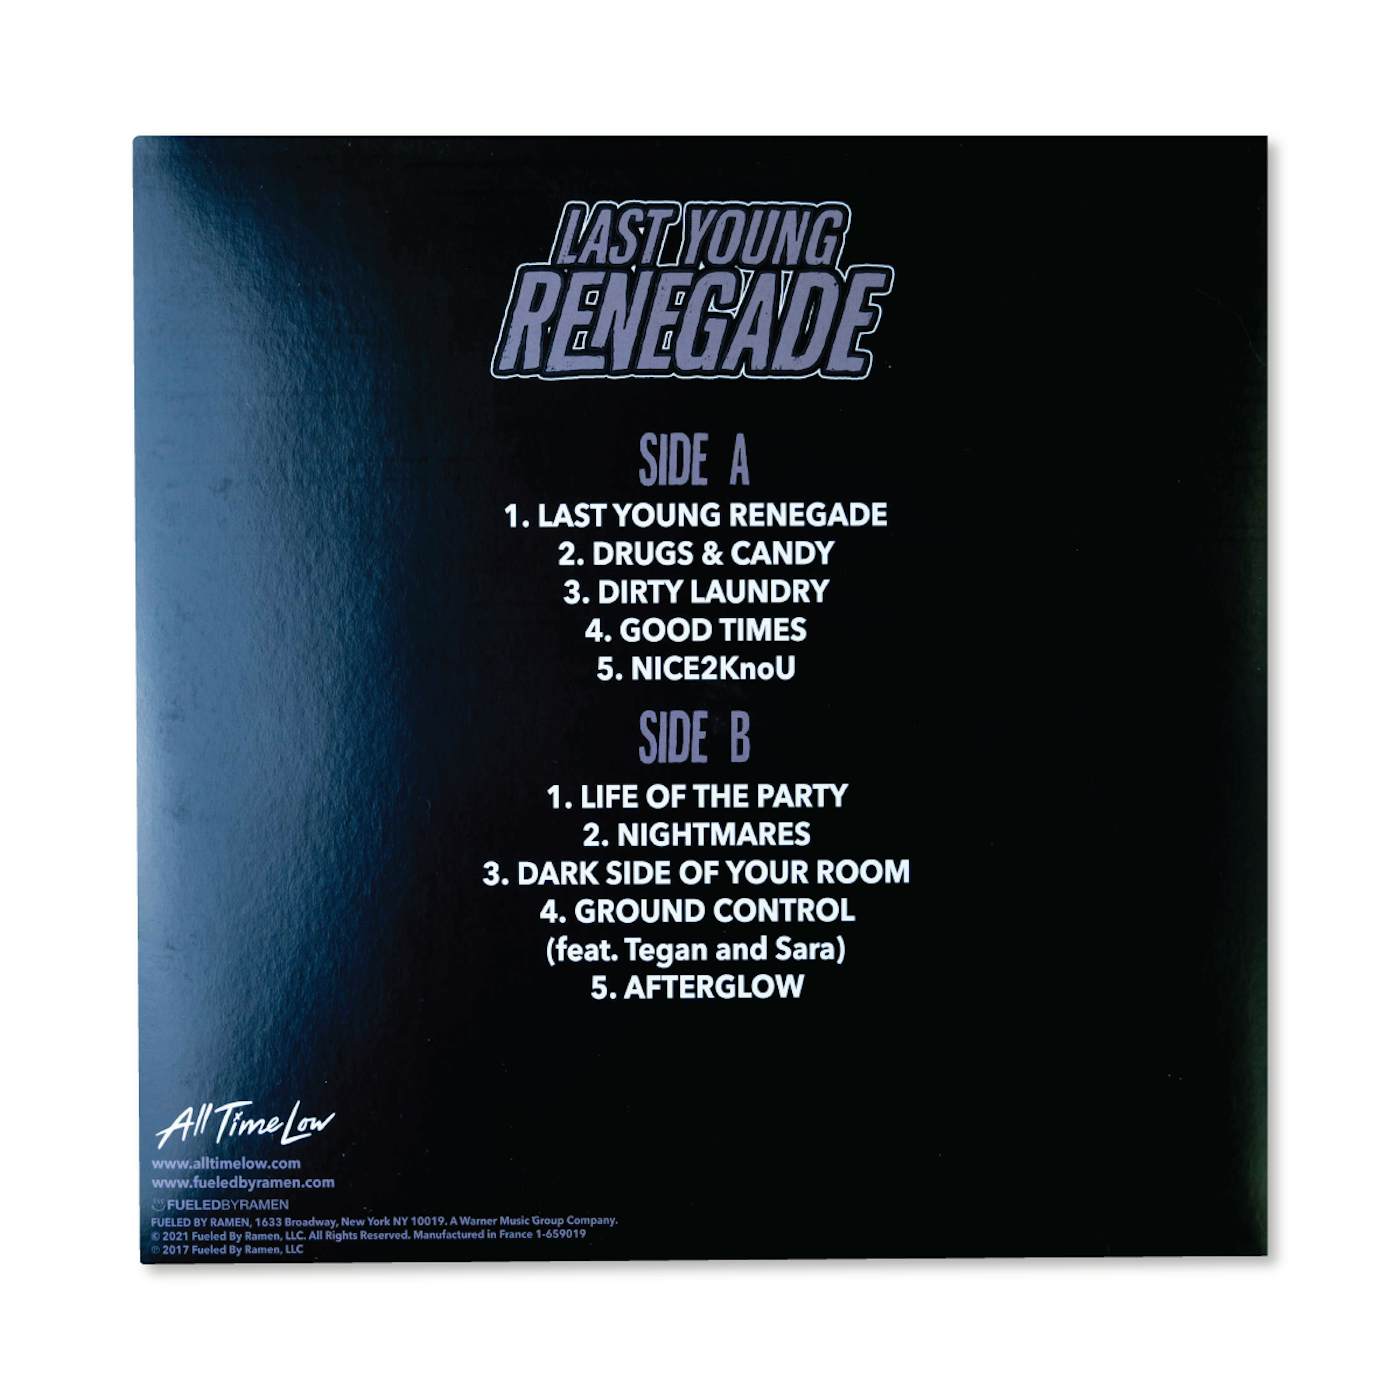 All Time Low - Last Young Renegade Limited Edition Vinyl LP